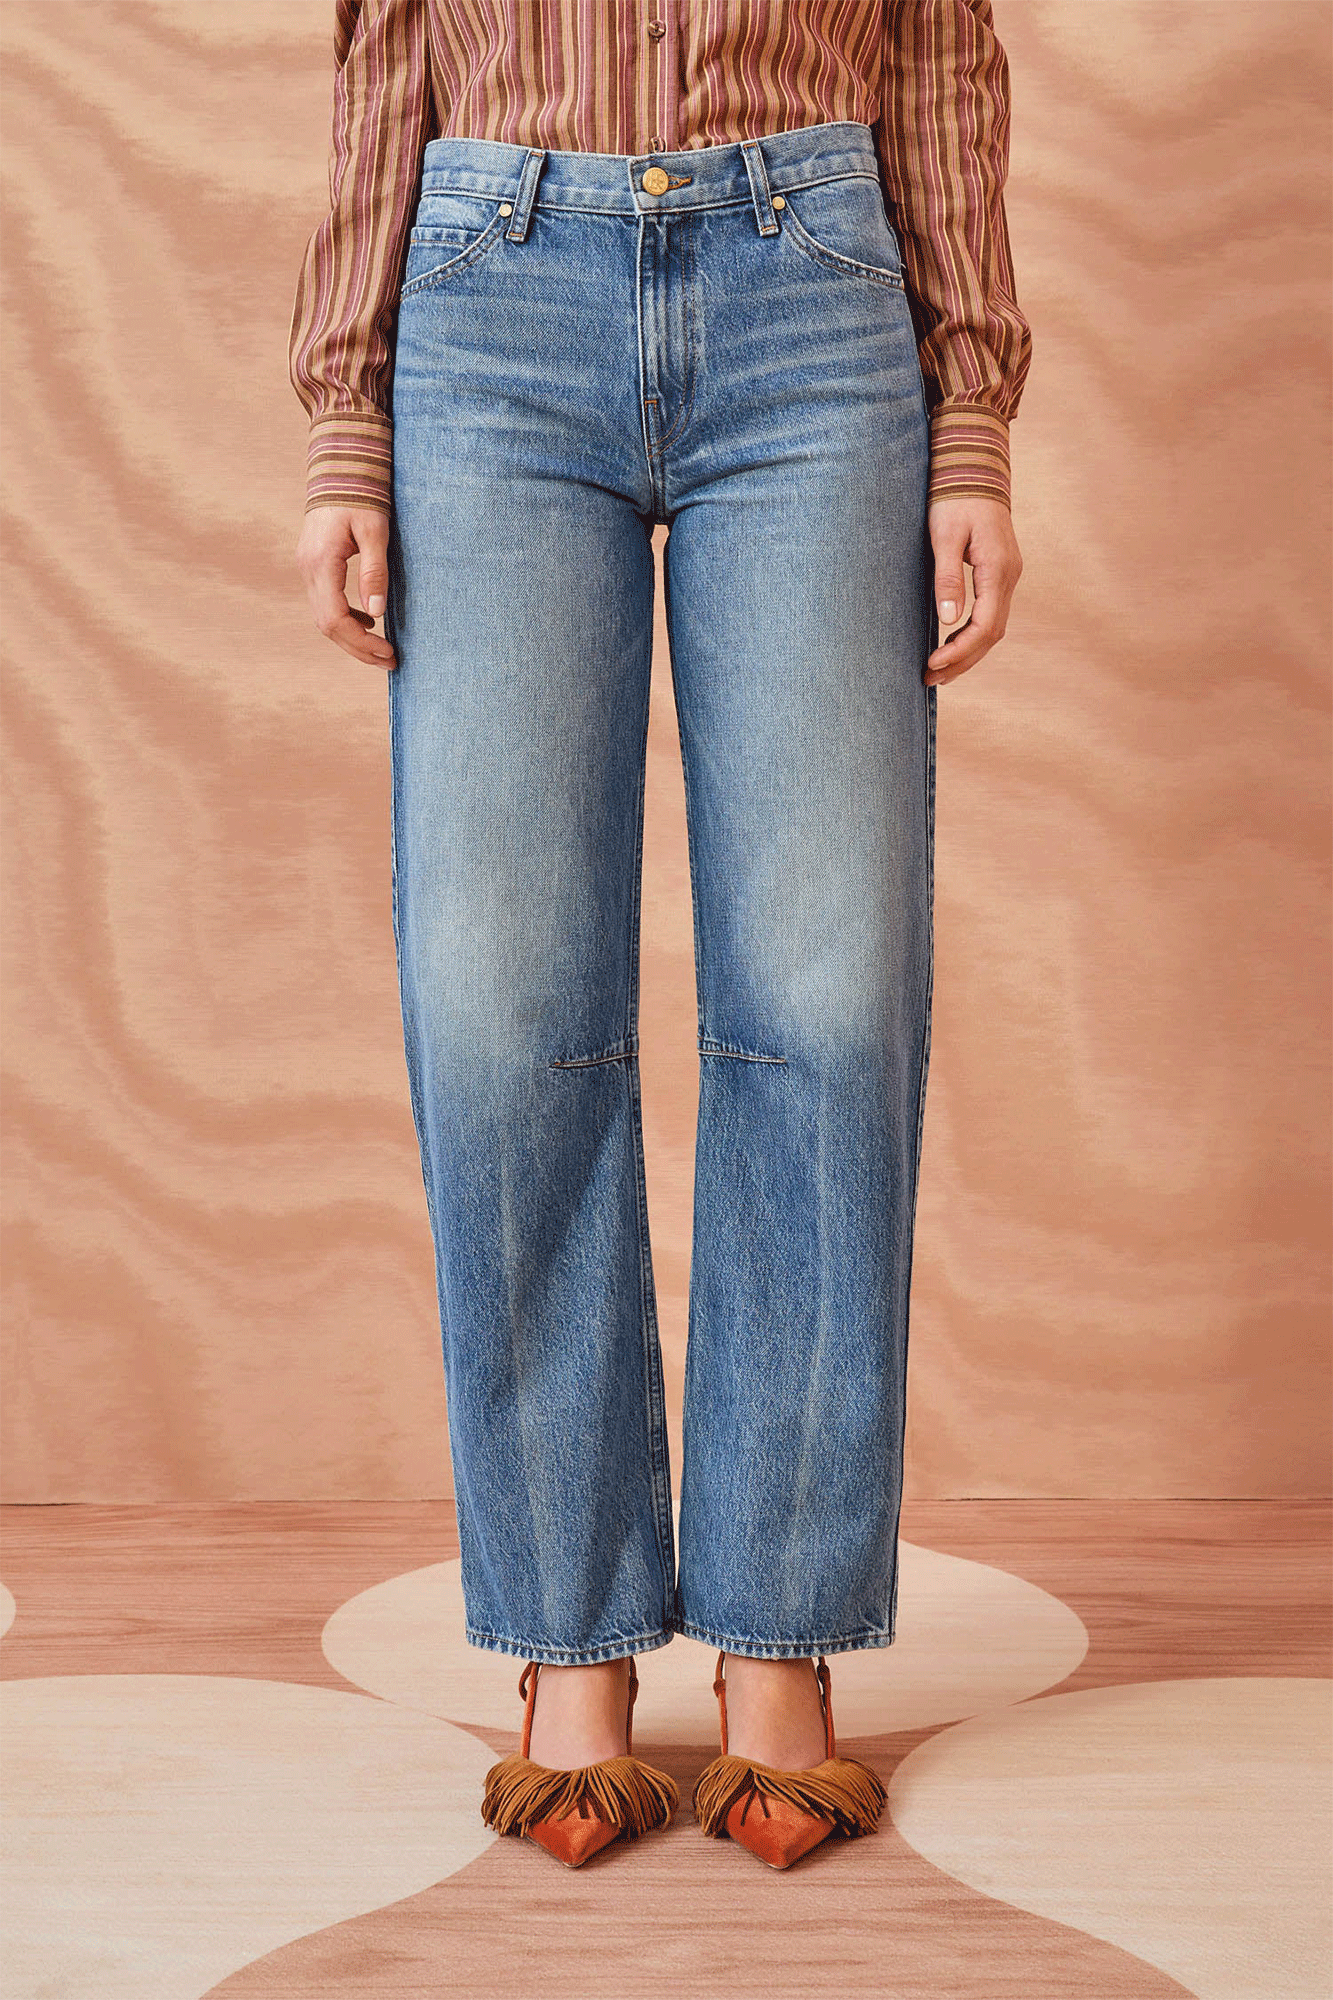 The Esme Jean from Ulla Johnson is made from high-quality non-stretch denim, crafted with care in Los Angeles.